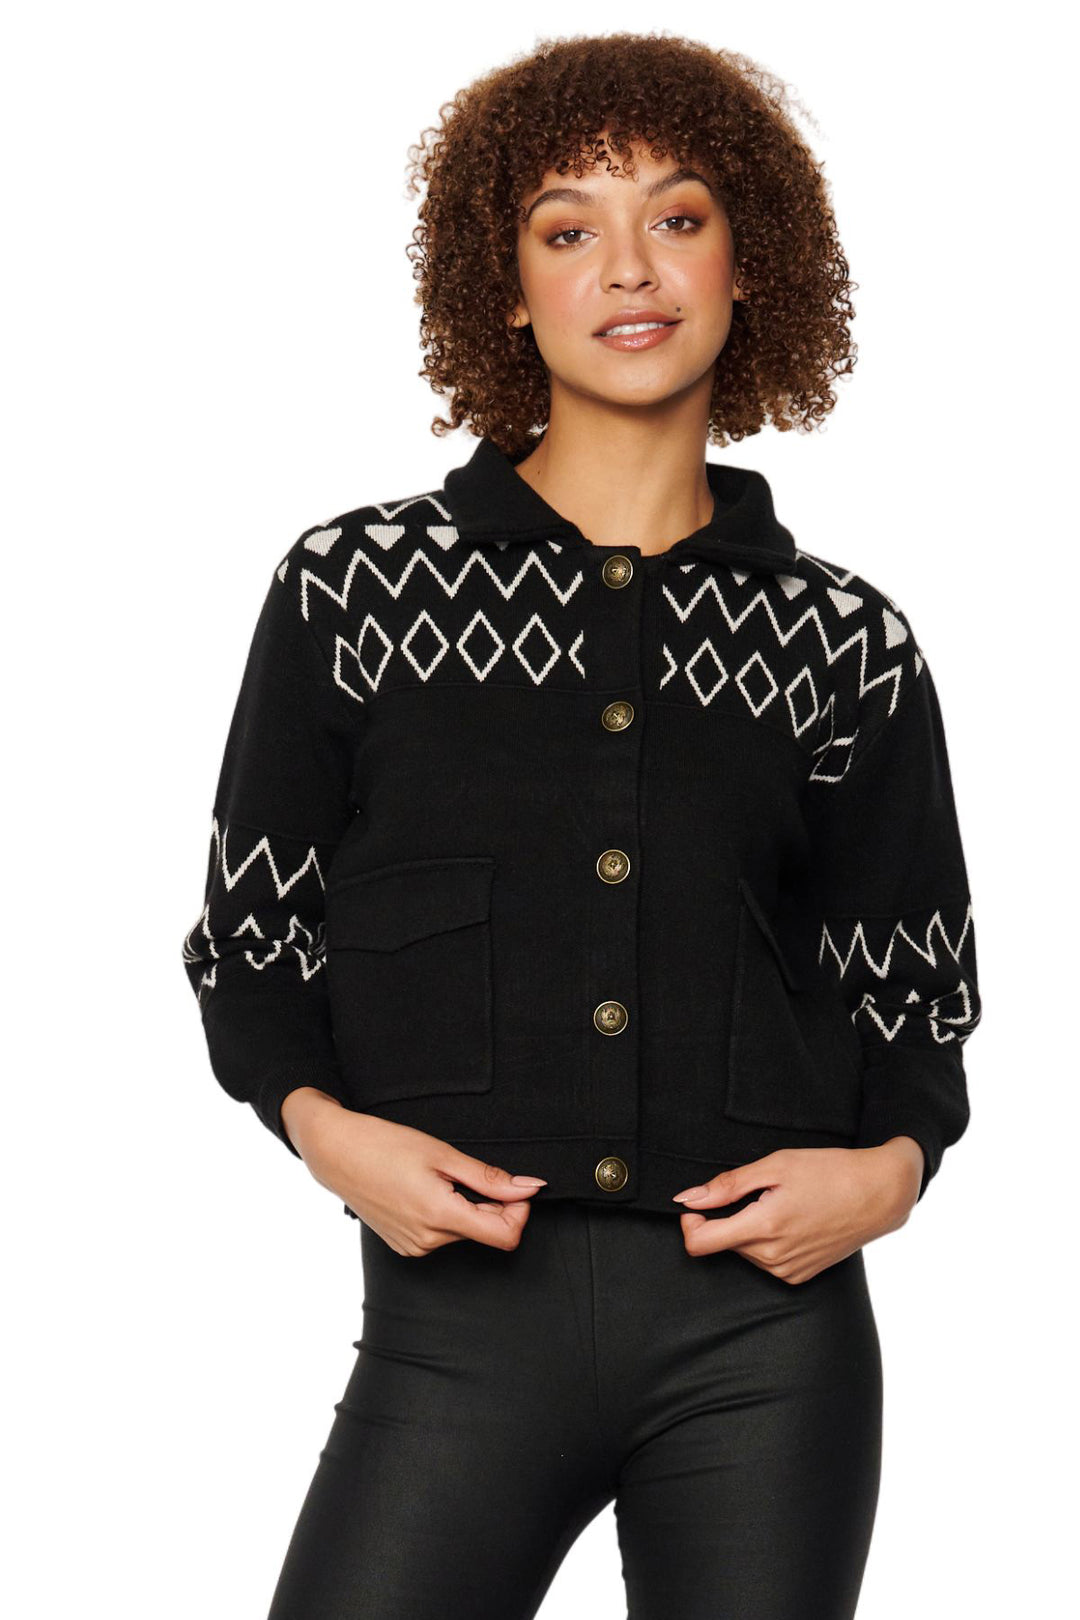 For a timeless jacket look no further than the Madison Jacket by designer Caju.